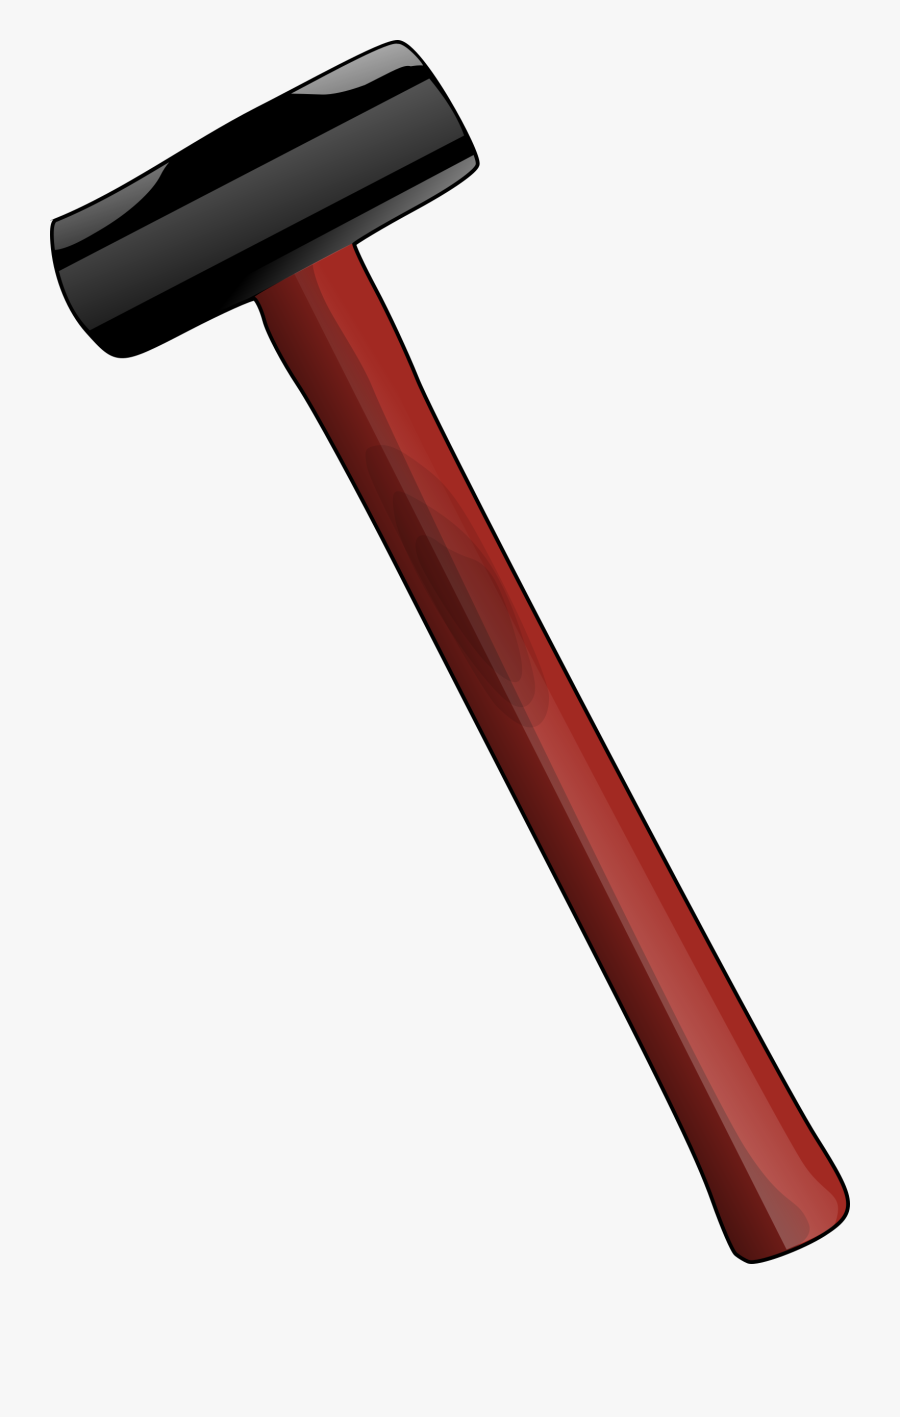 Free Hammers Clipart Free Images Graphics Animated - Sledge Hammer Clipart, Transparent Clipart